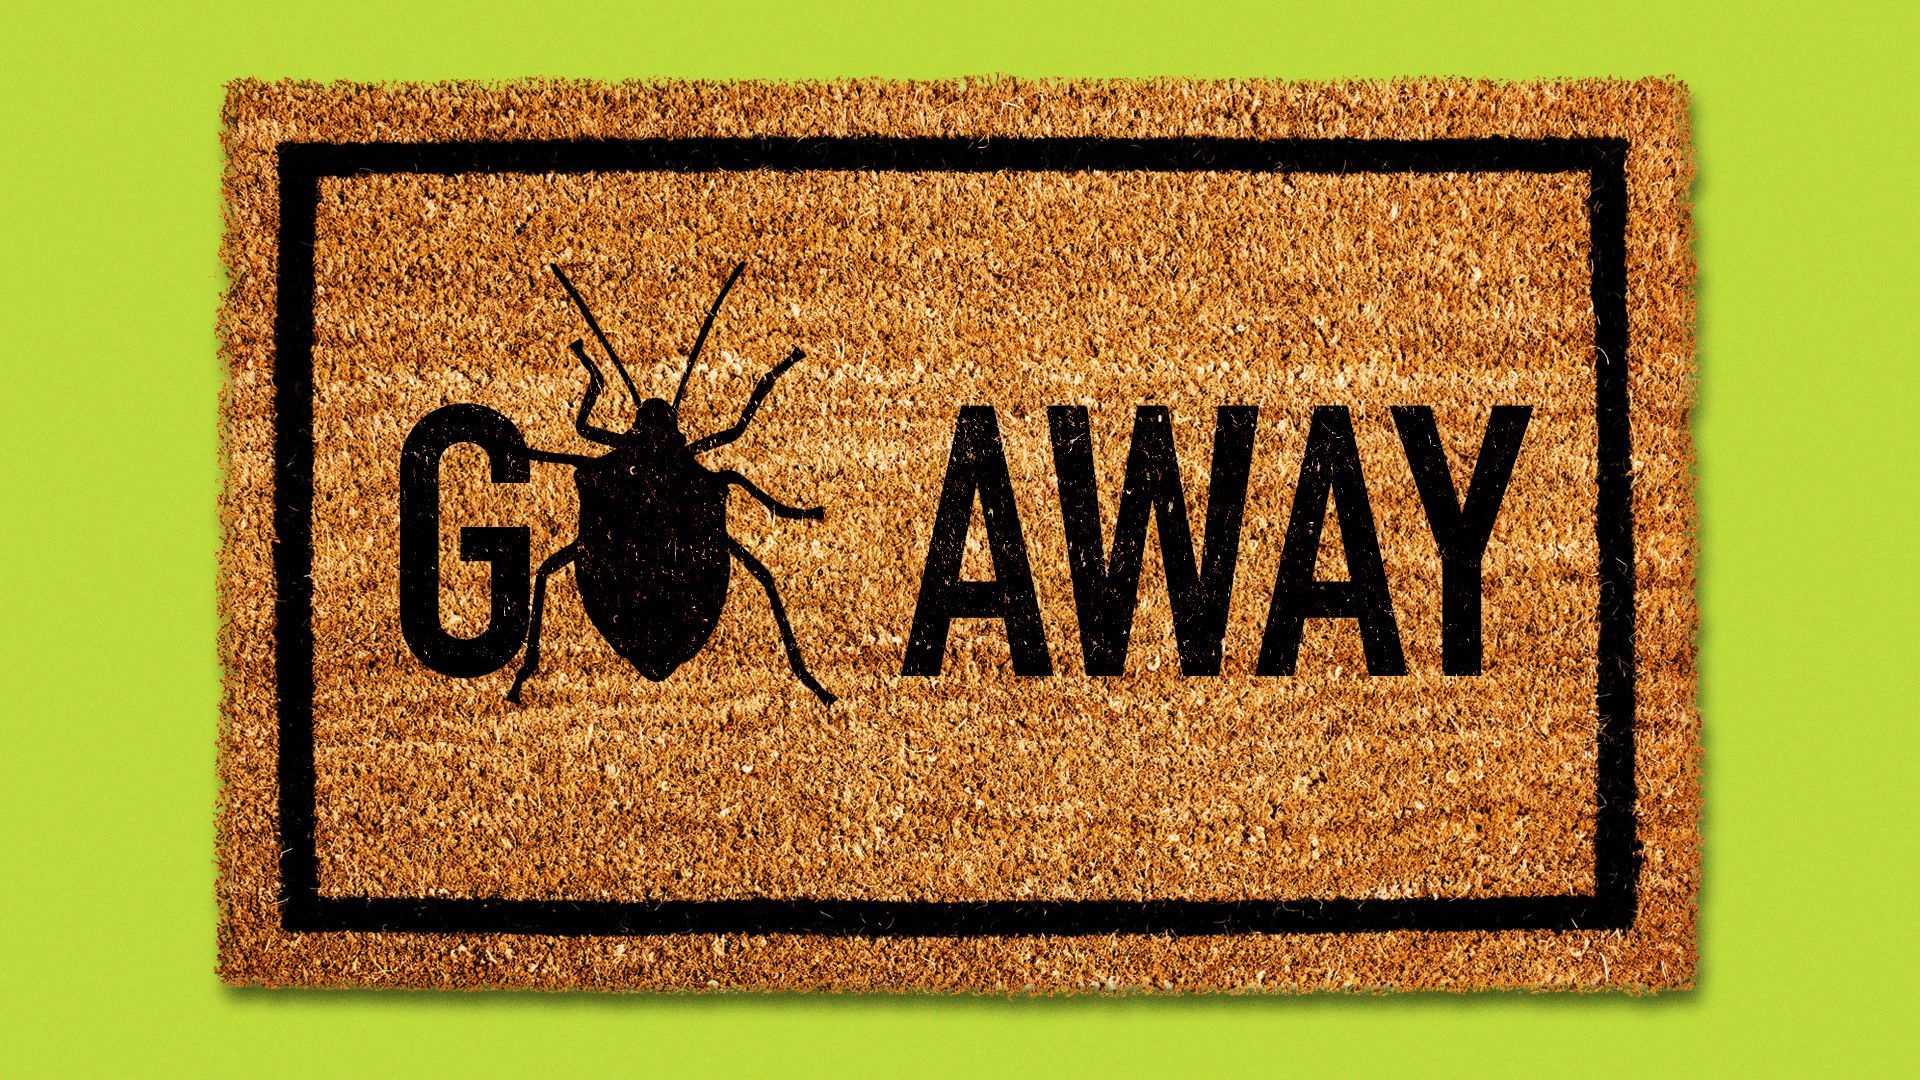 Illustration of a welcome mat but it says "Go Away." The "o" is a stink bug.